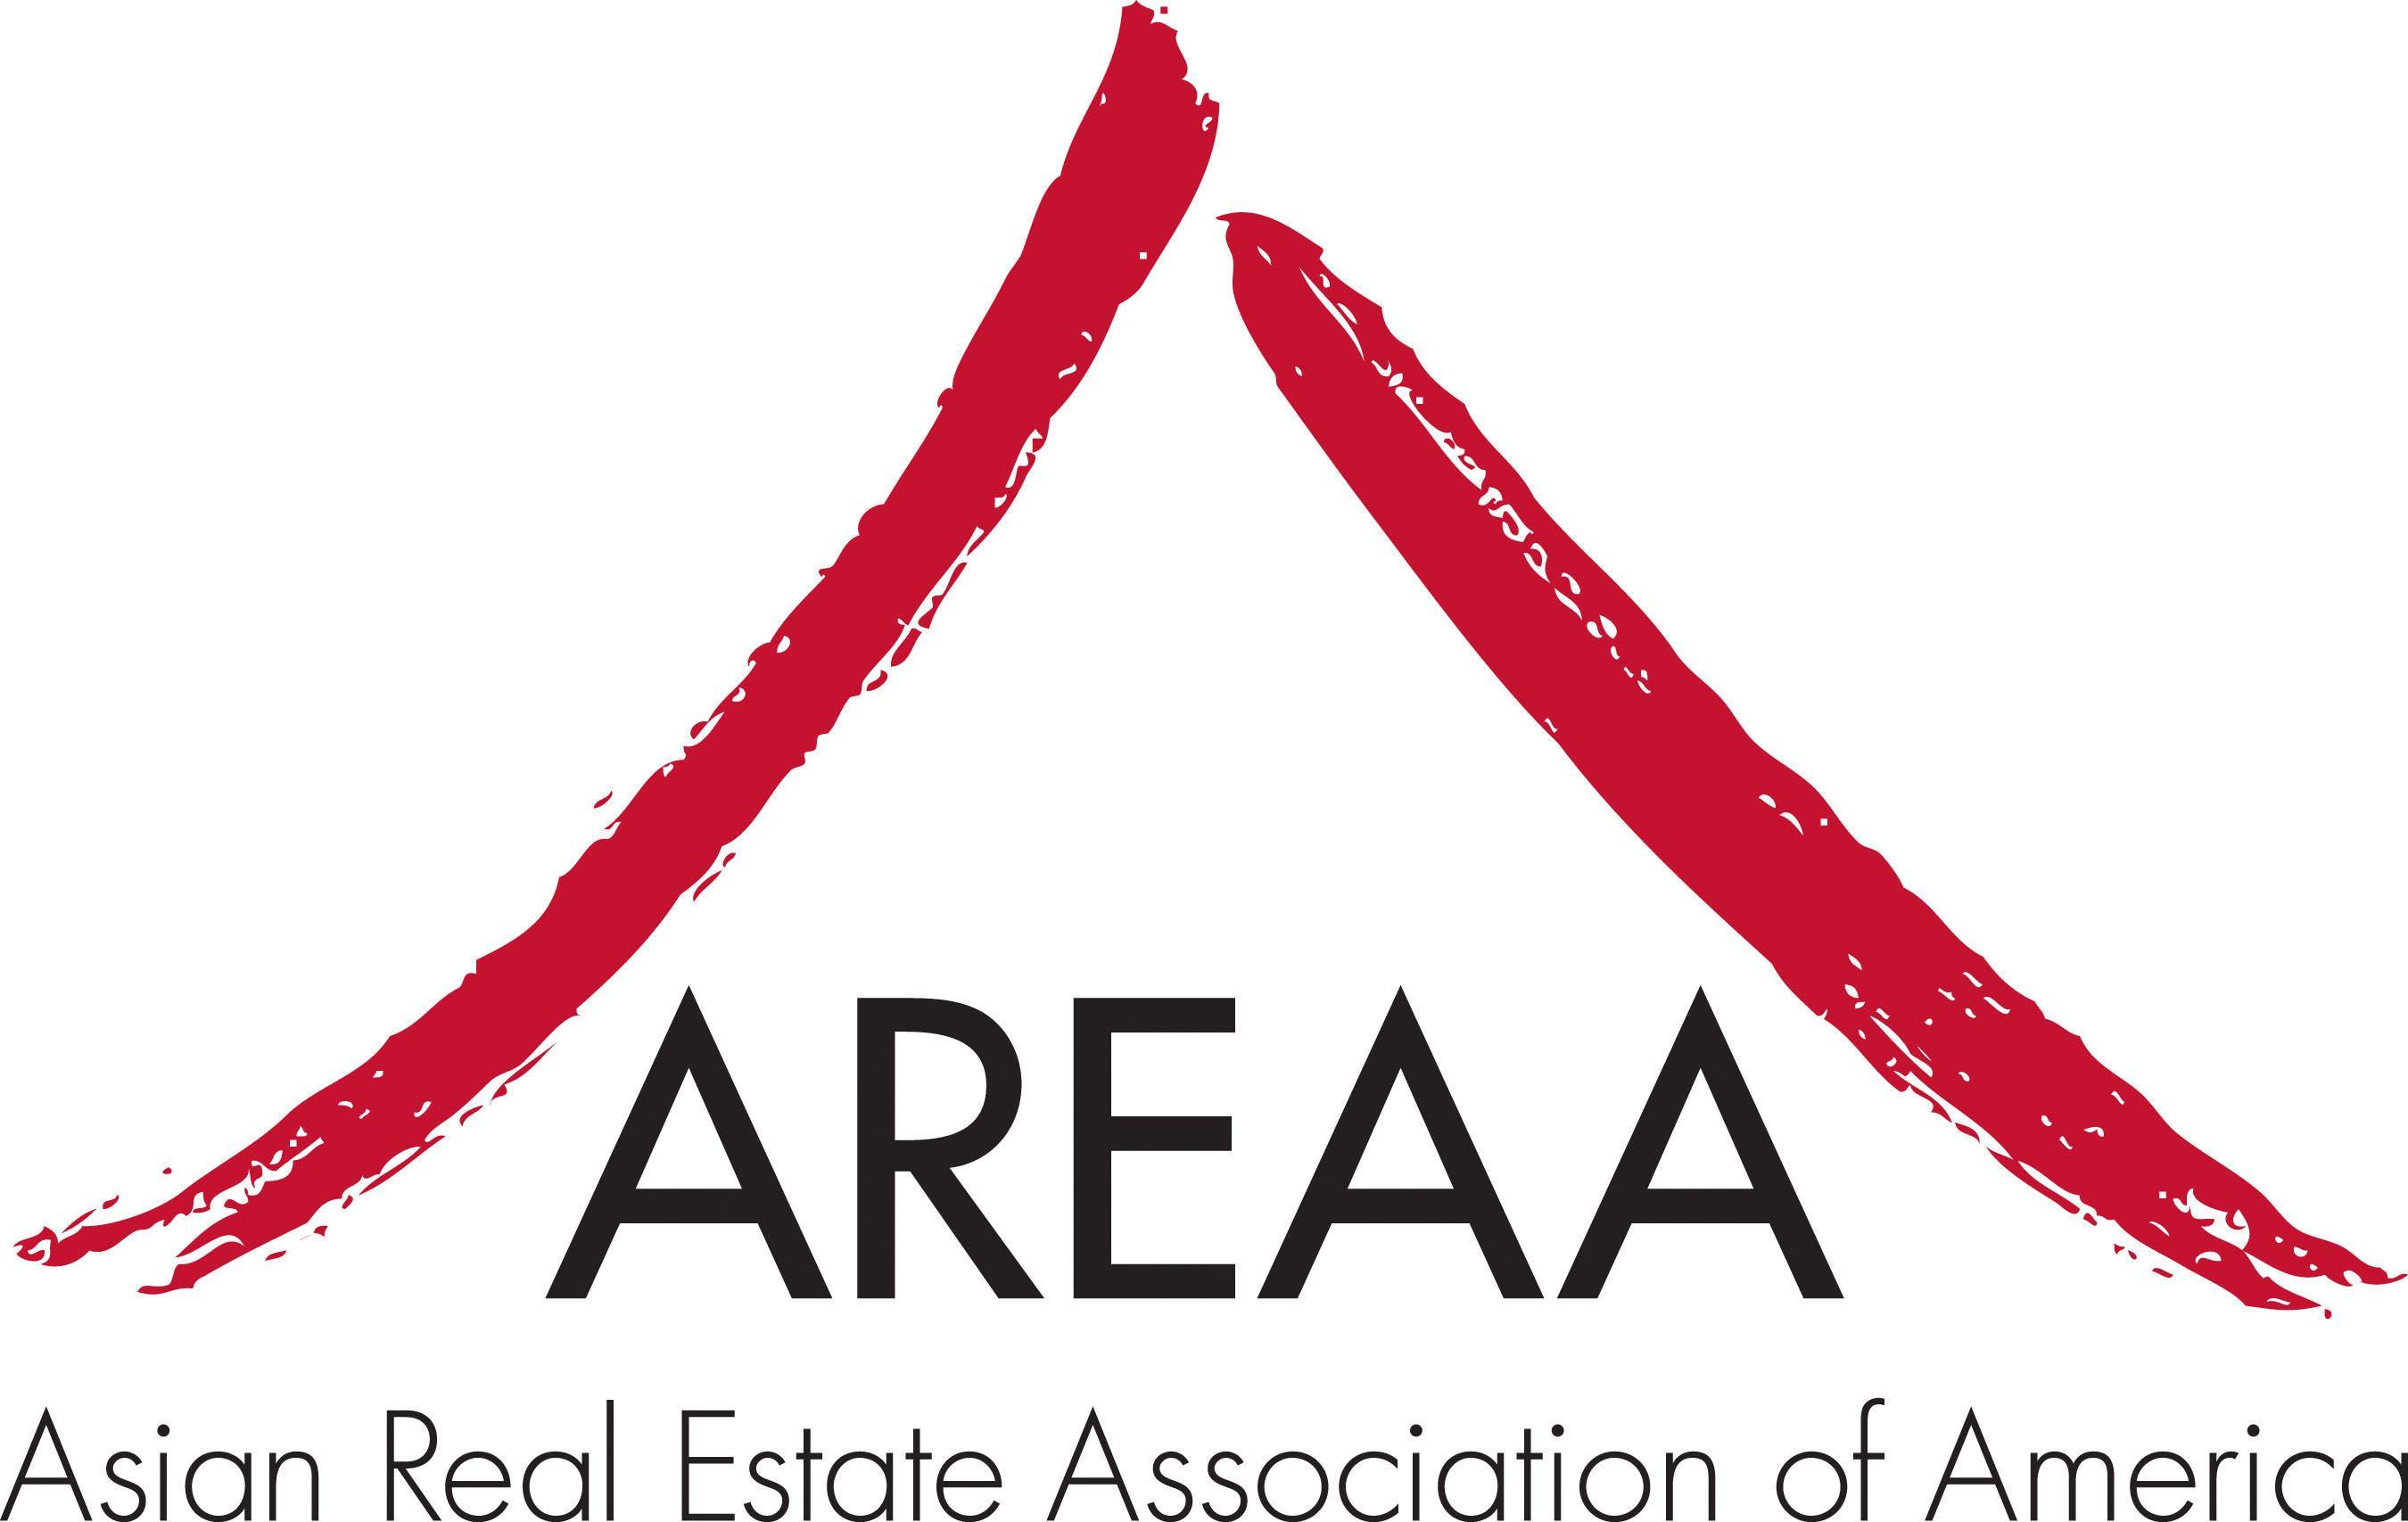 Areaa Logo - For Asian Real Estate Association of America (AREAA), Asian American